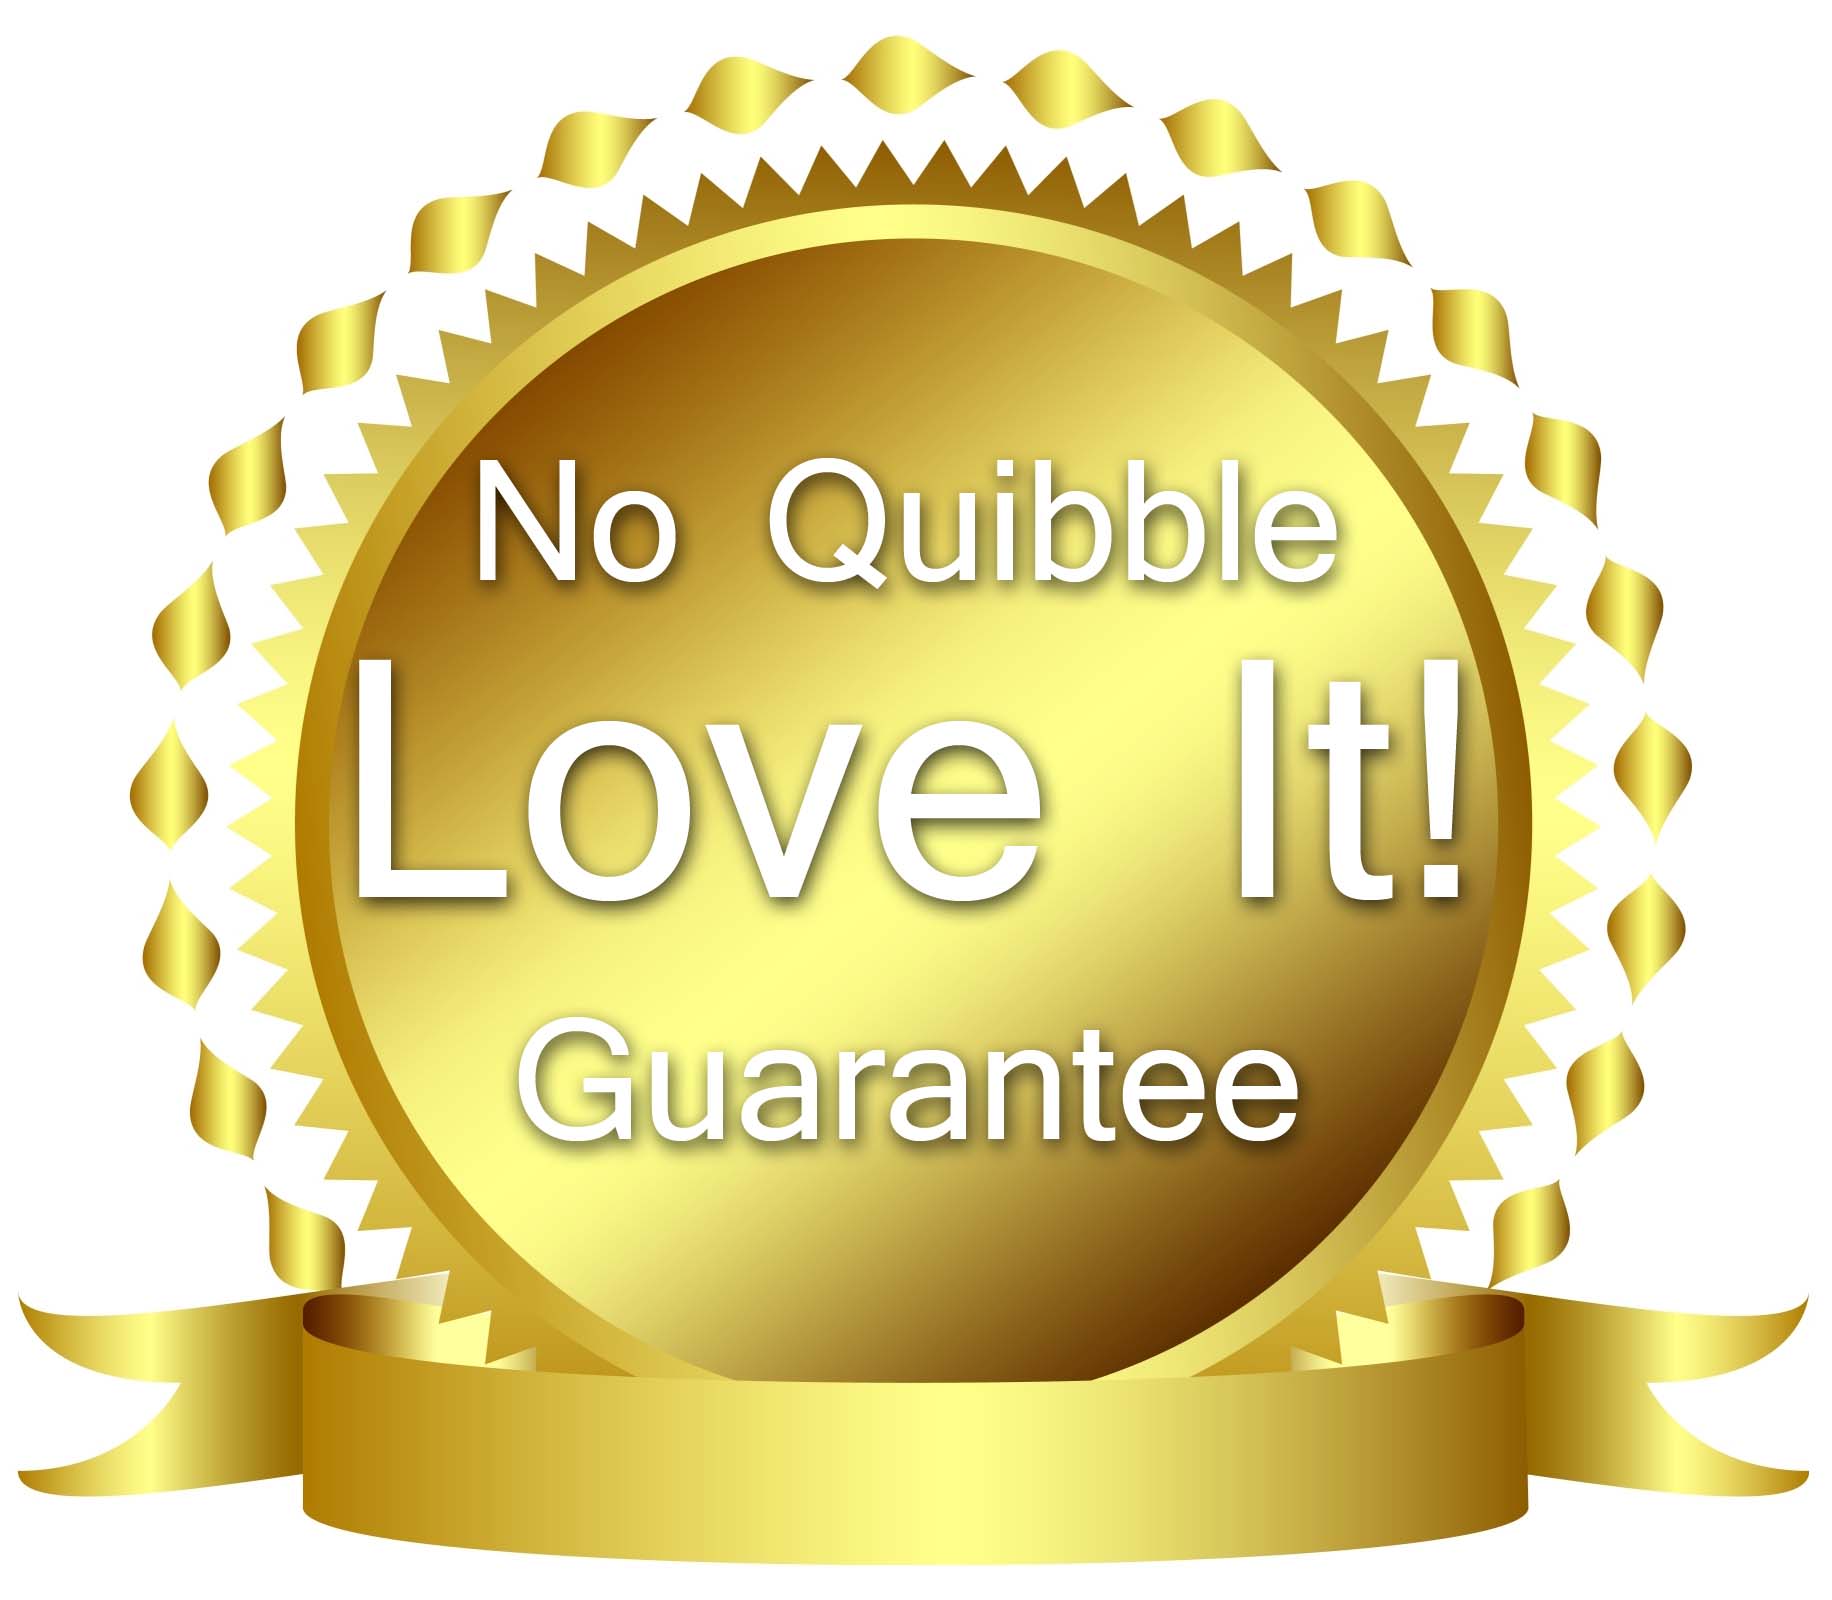 You've got nothing to lose with our 'Love it' guarantee